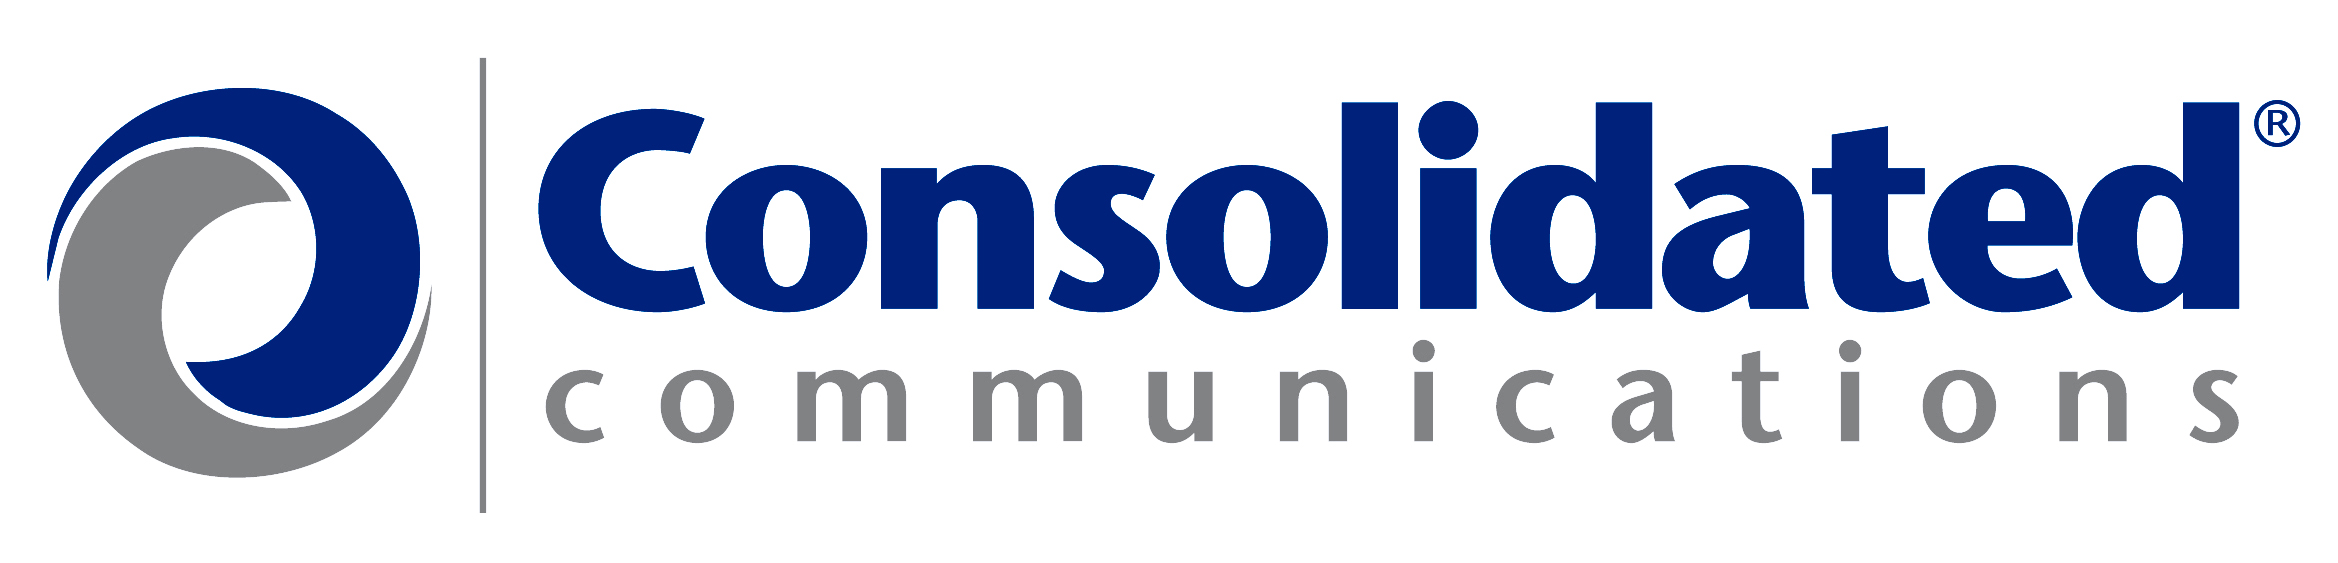 Consolidated Brand Logo